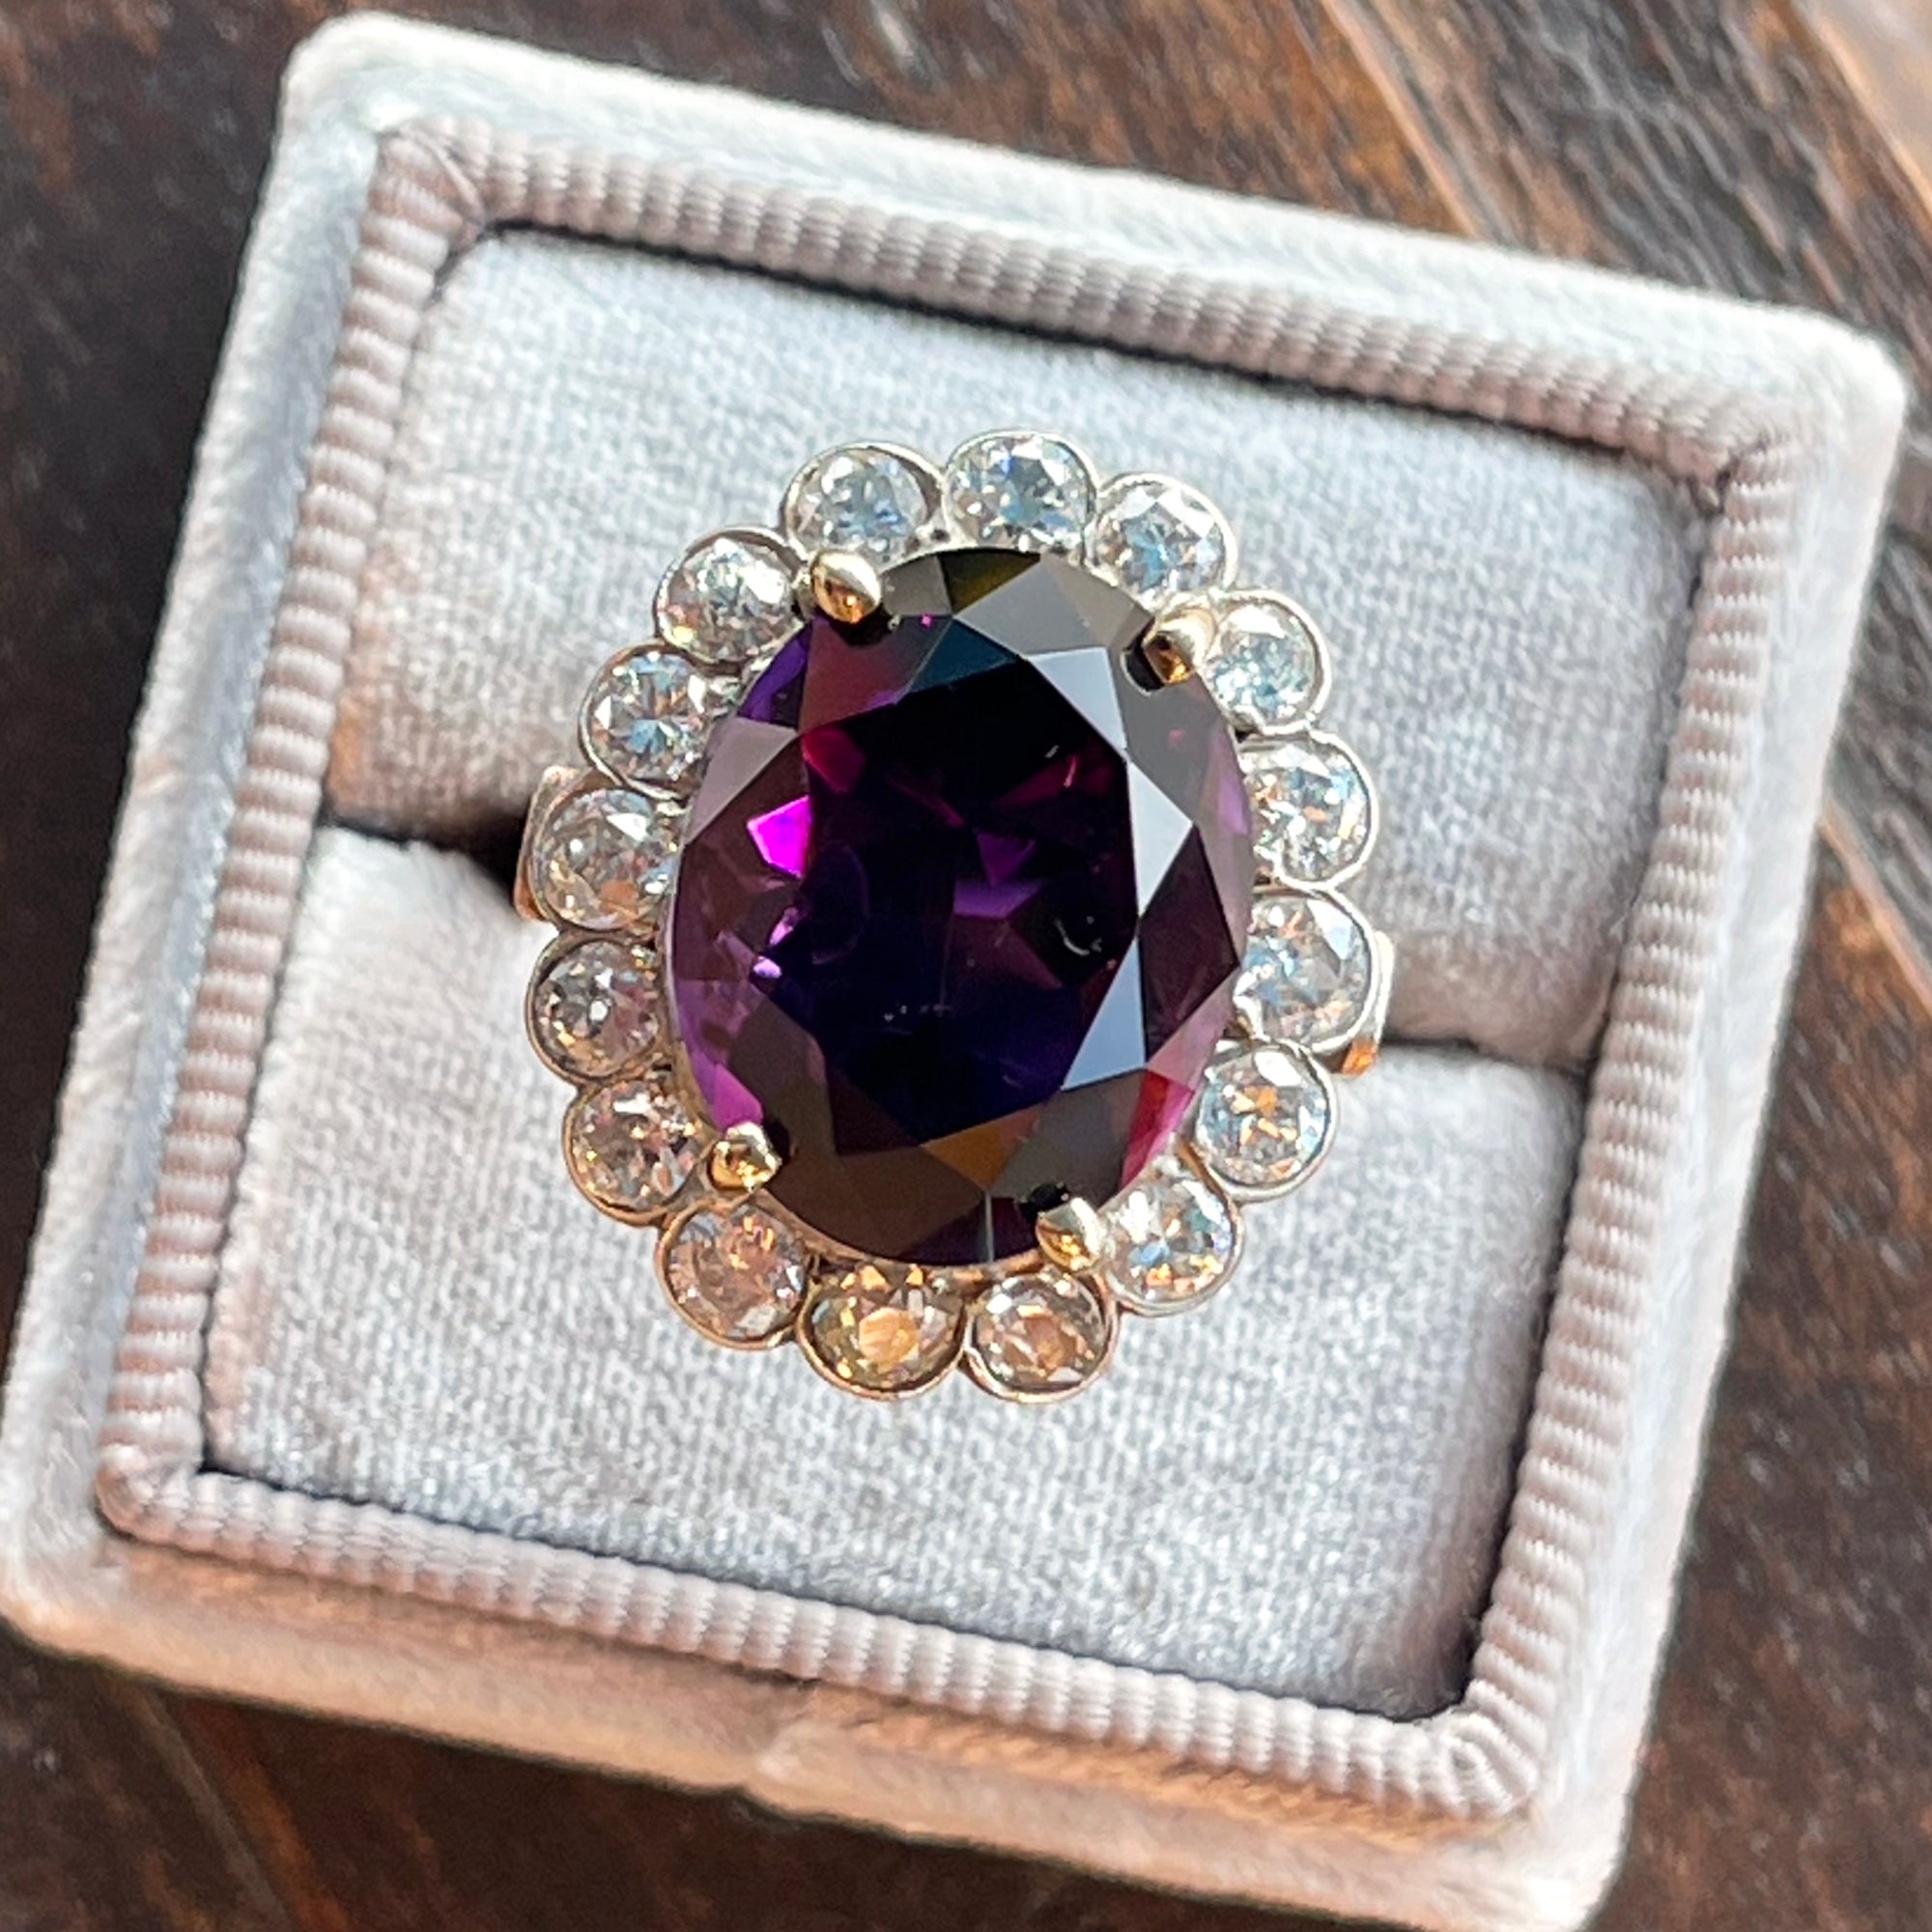 Custom Amethyst and Citrine Cluster Ring - Bario Neal